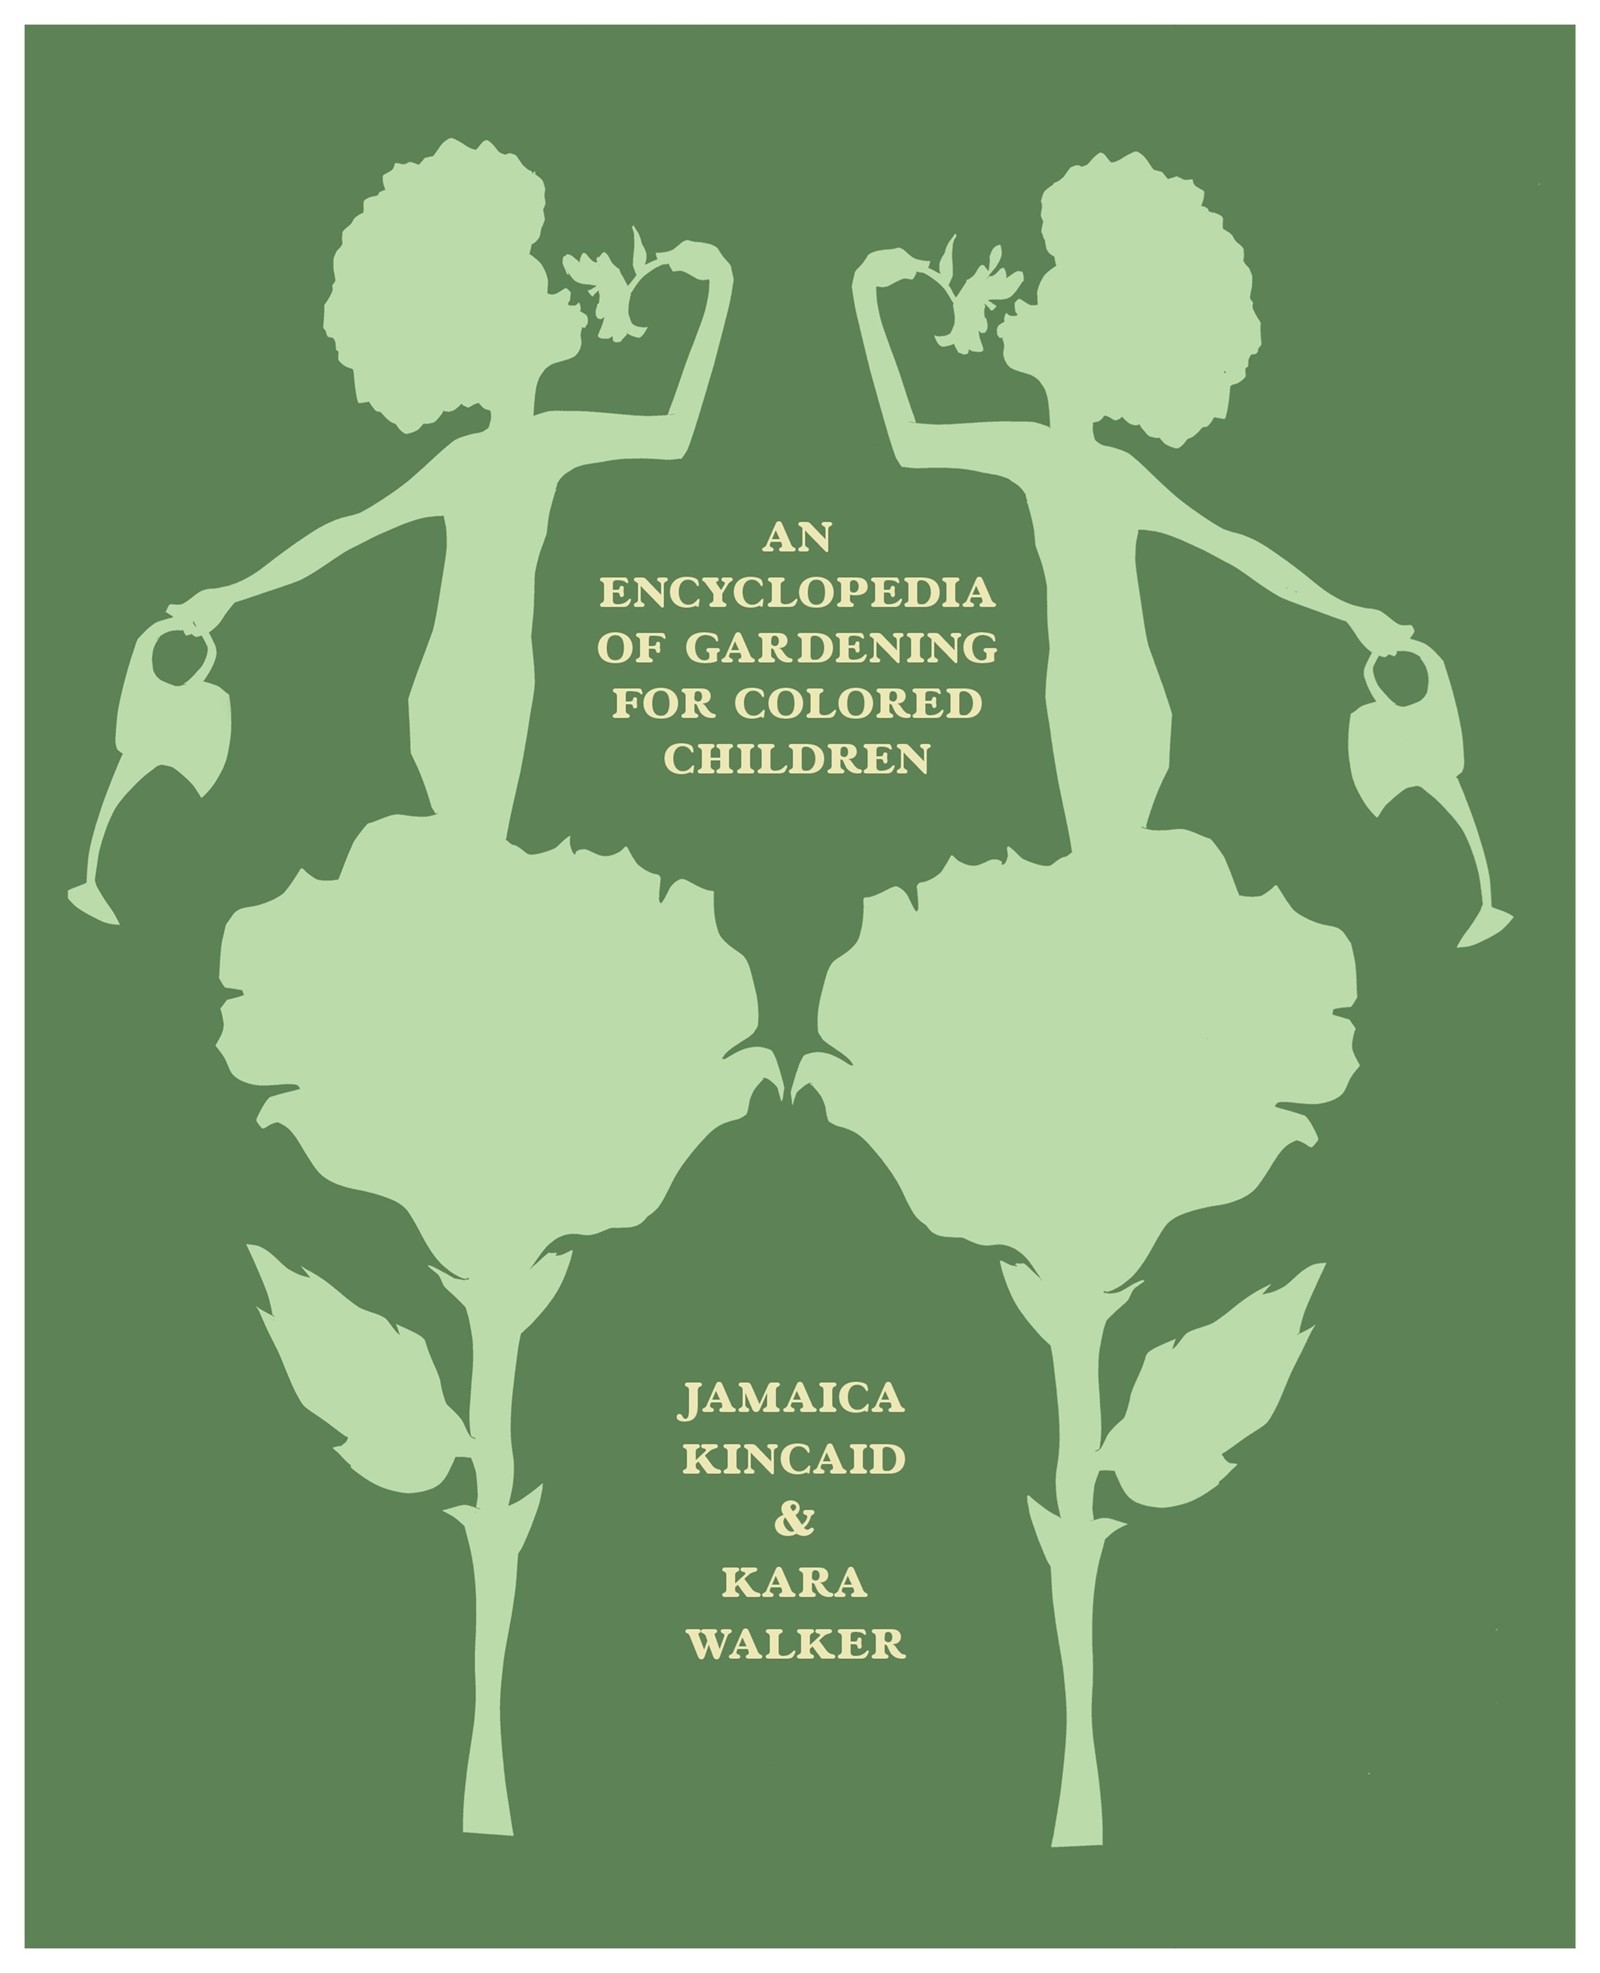 An encyclopedia of gardening for children of color